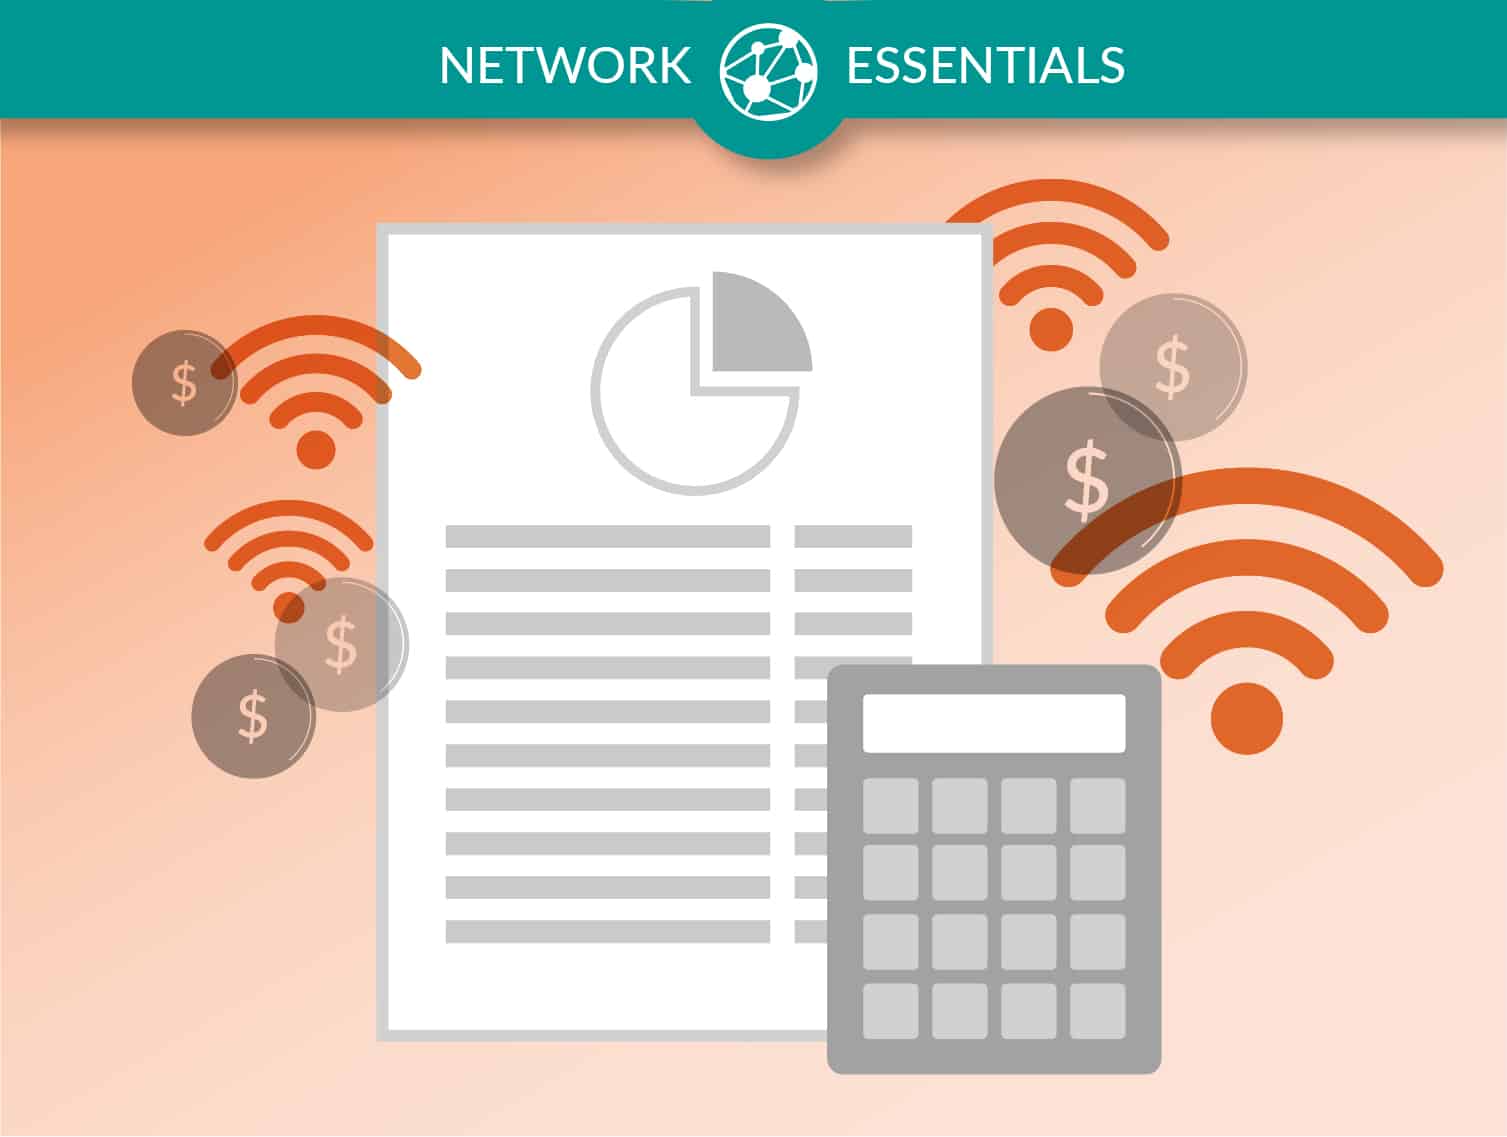 Network Essentials School Budget Graphic of a calculator and a budgeting spreadsheet